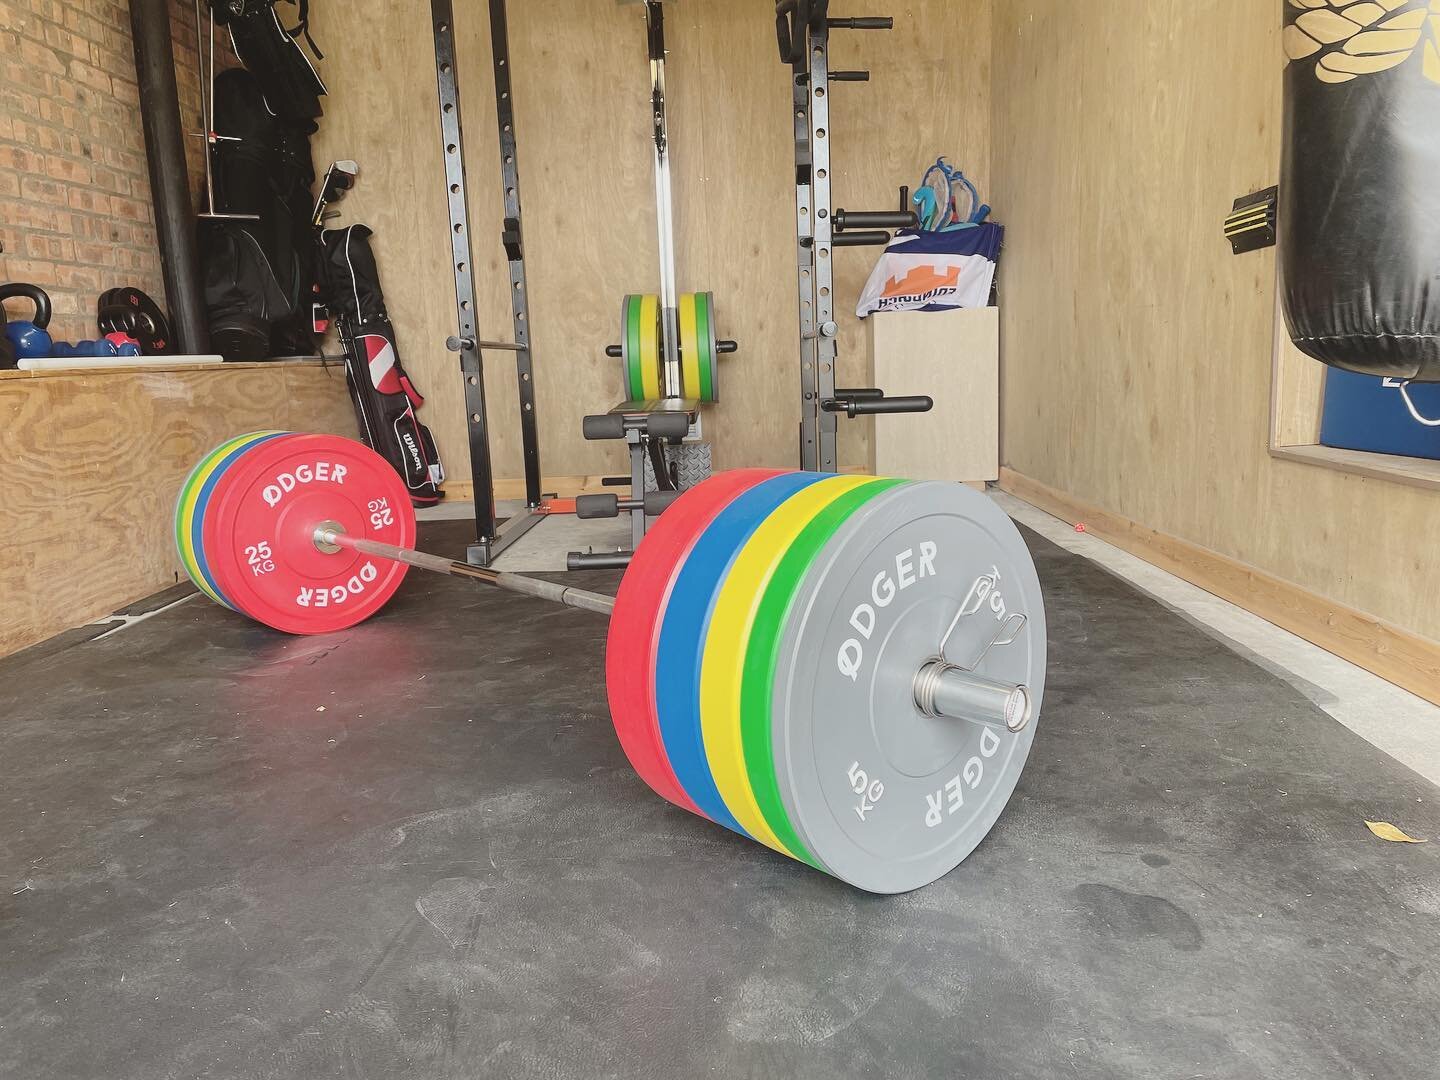 Full Monty Spotlight | Jack D (29, Maidenhead).

&ldquo;These weights have superseded any expectations I had about bumper plates. The design makes the gym feel vibrant yet sleek, and they drop well from high positions without damaging the floor or di